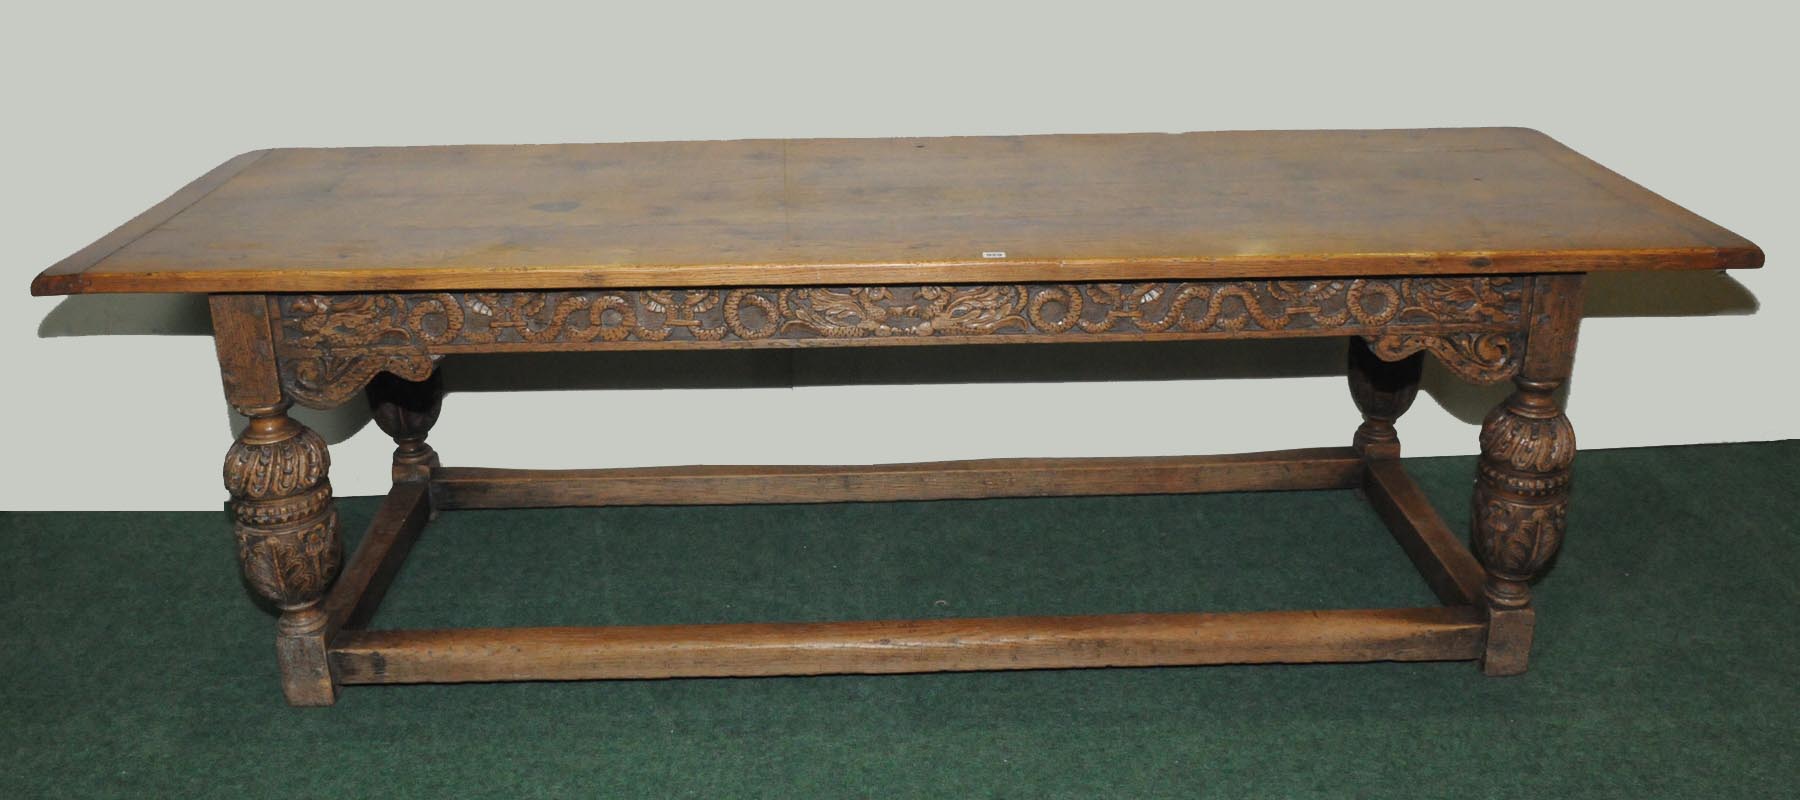 Oak refectory table, late 19th century or c.